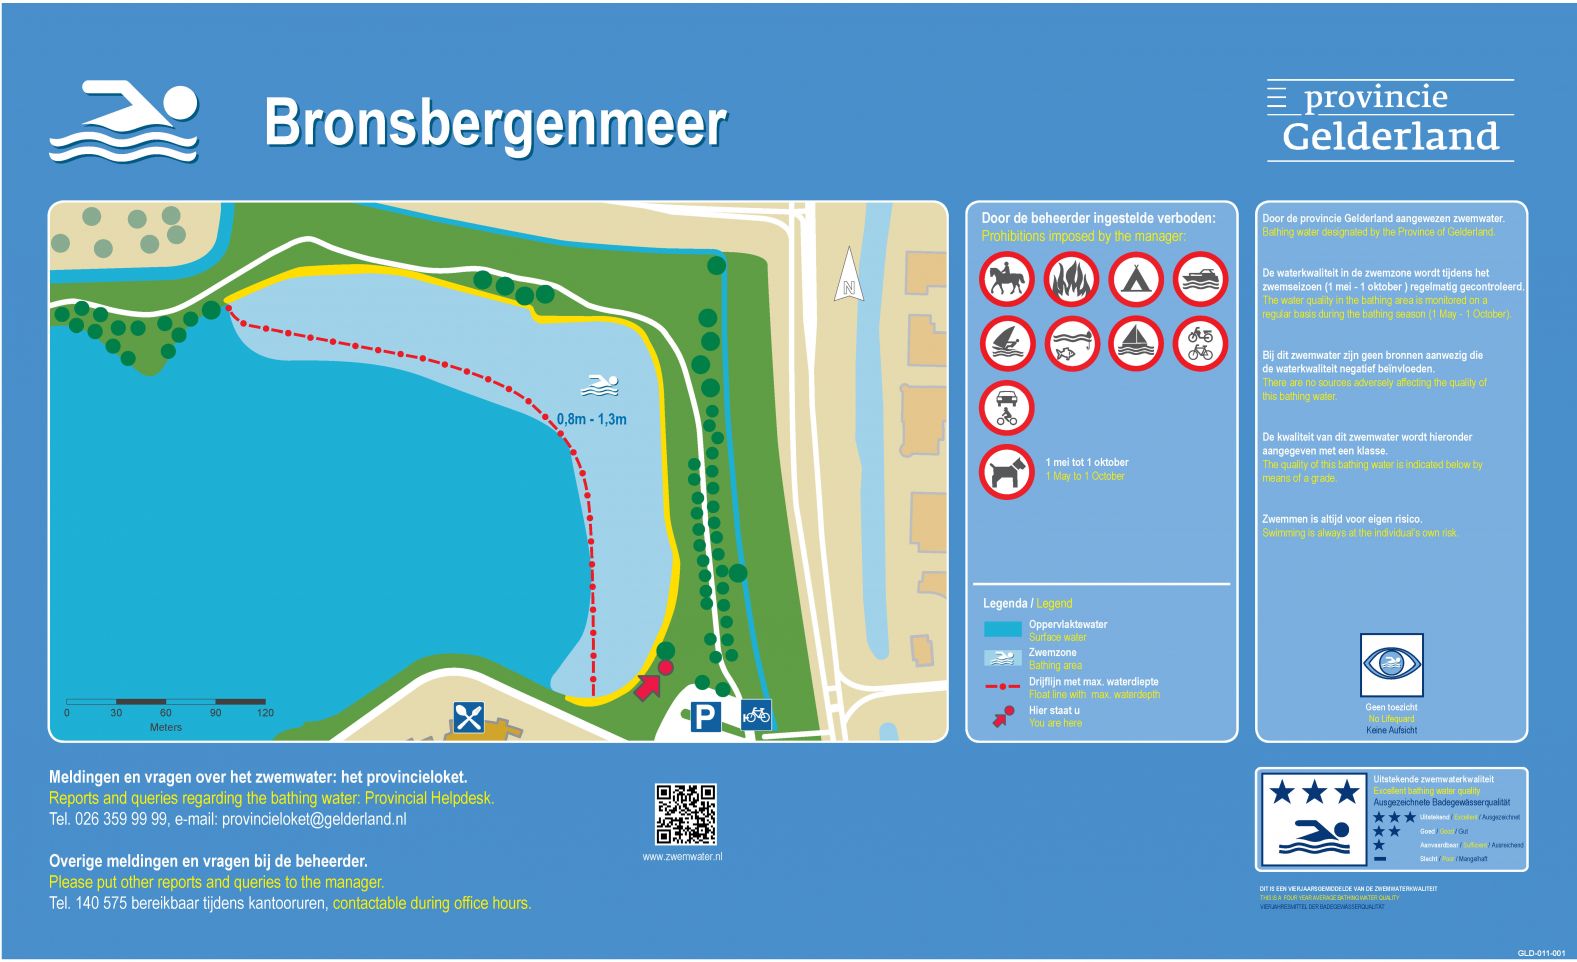 The information board at the swimming location Bronsbergermeer